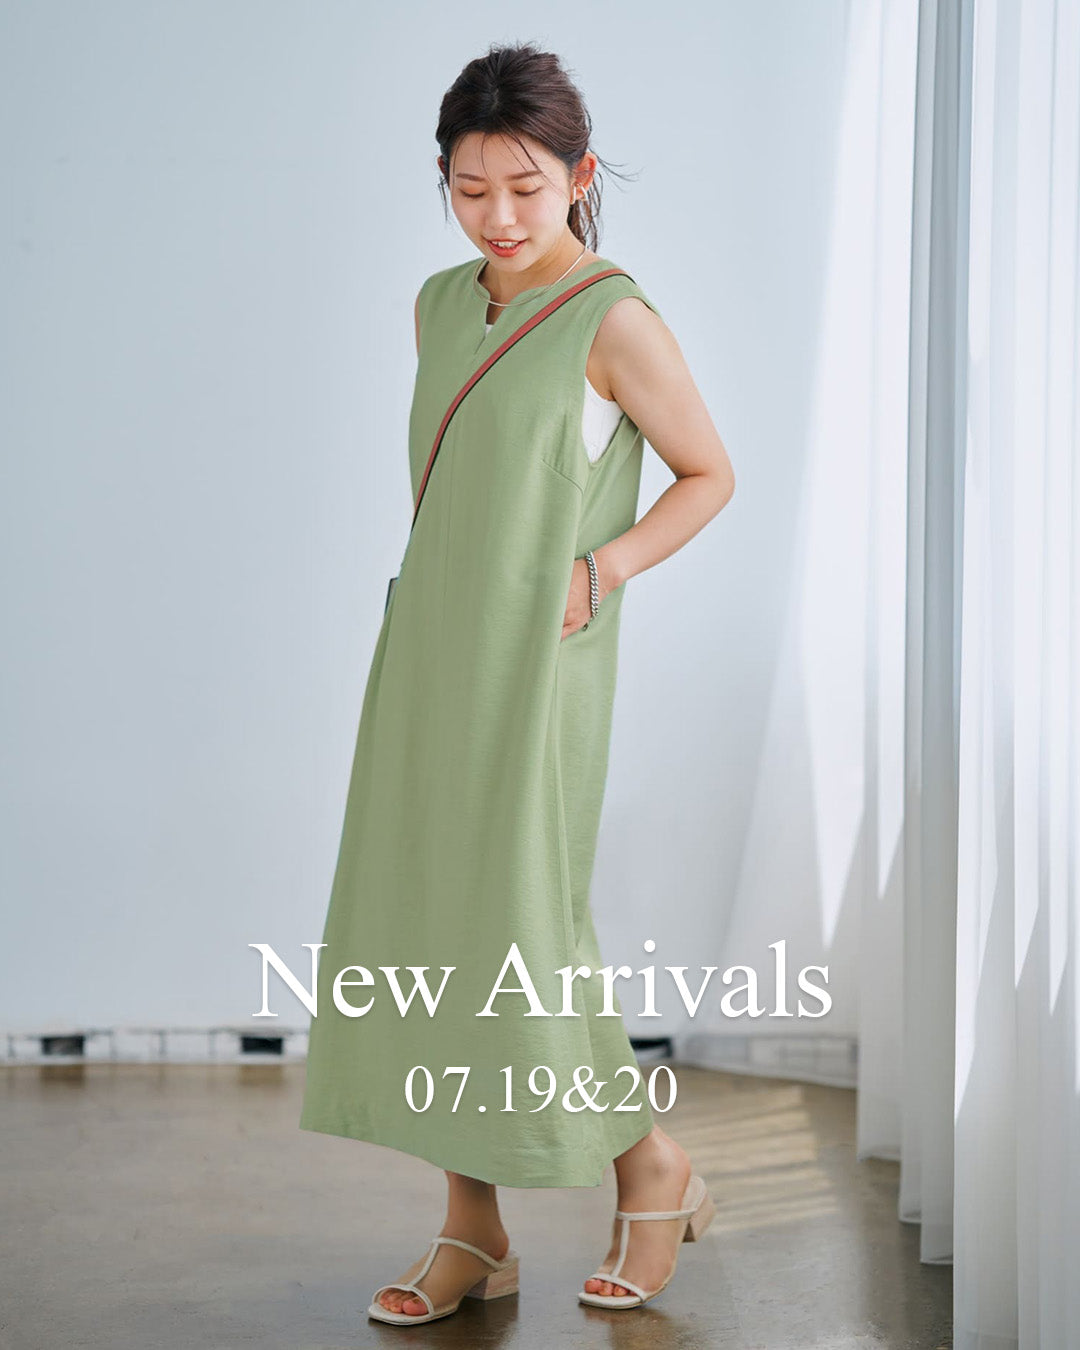 Weekly New Arrivals】07.19(Wed),20(Thu) – tagged 